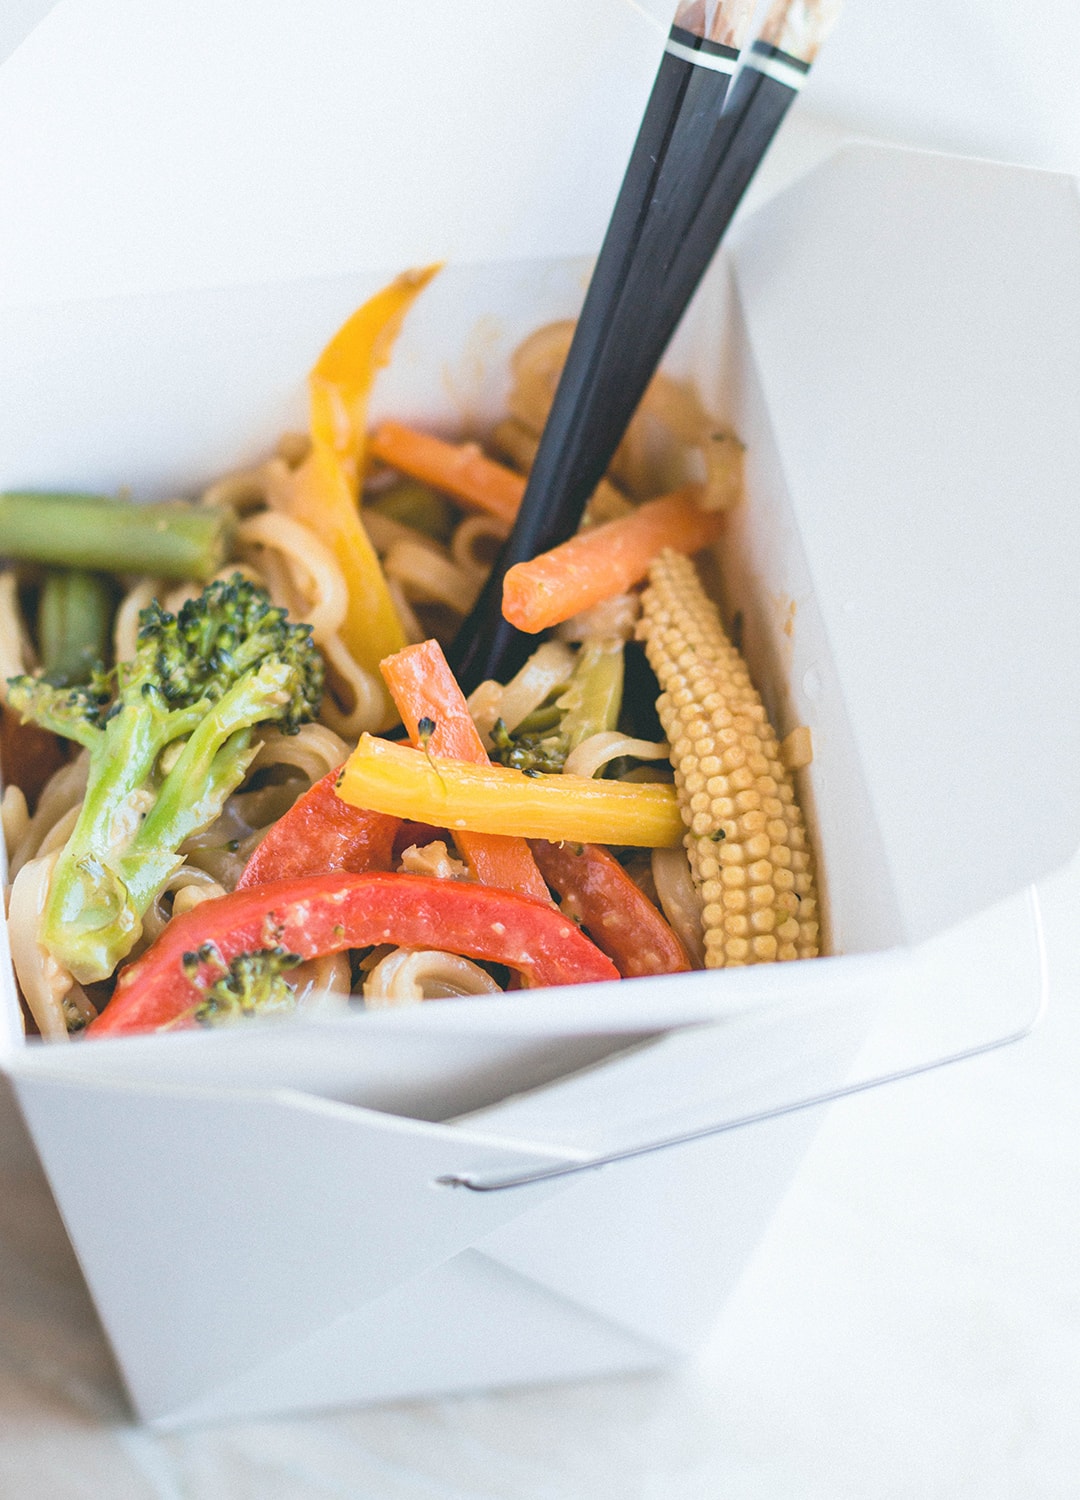 Vegetable Stir Fry with Rice Noodles and Sunflower Seed Sauce - delicious vegan stir fry with peanut-free sauce made with tamari, sunflower seed butter, maple syrup, sesame oil, and ACV. You'll love this recipe! | thehealthfulideas.com